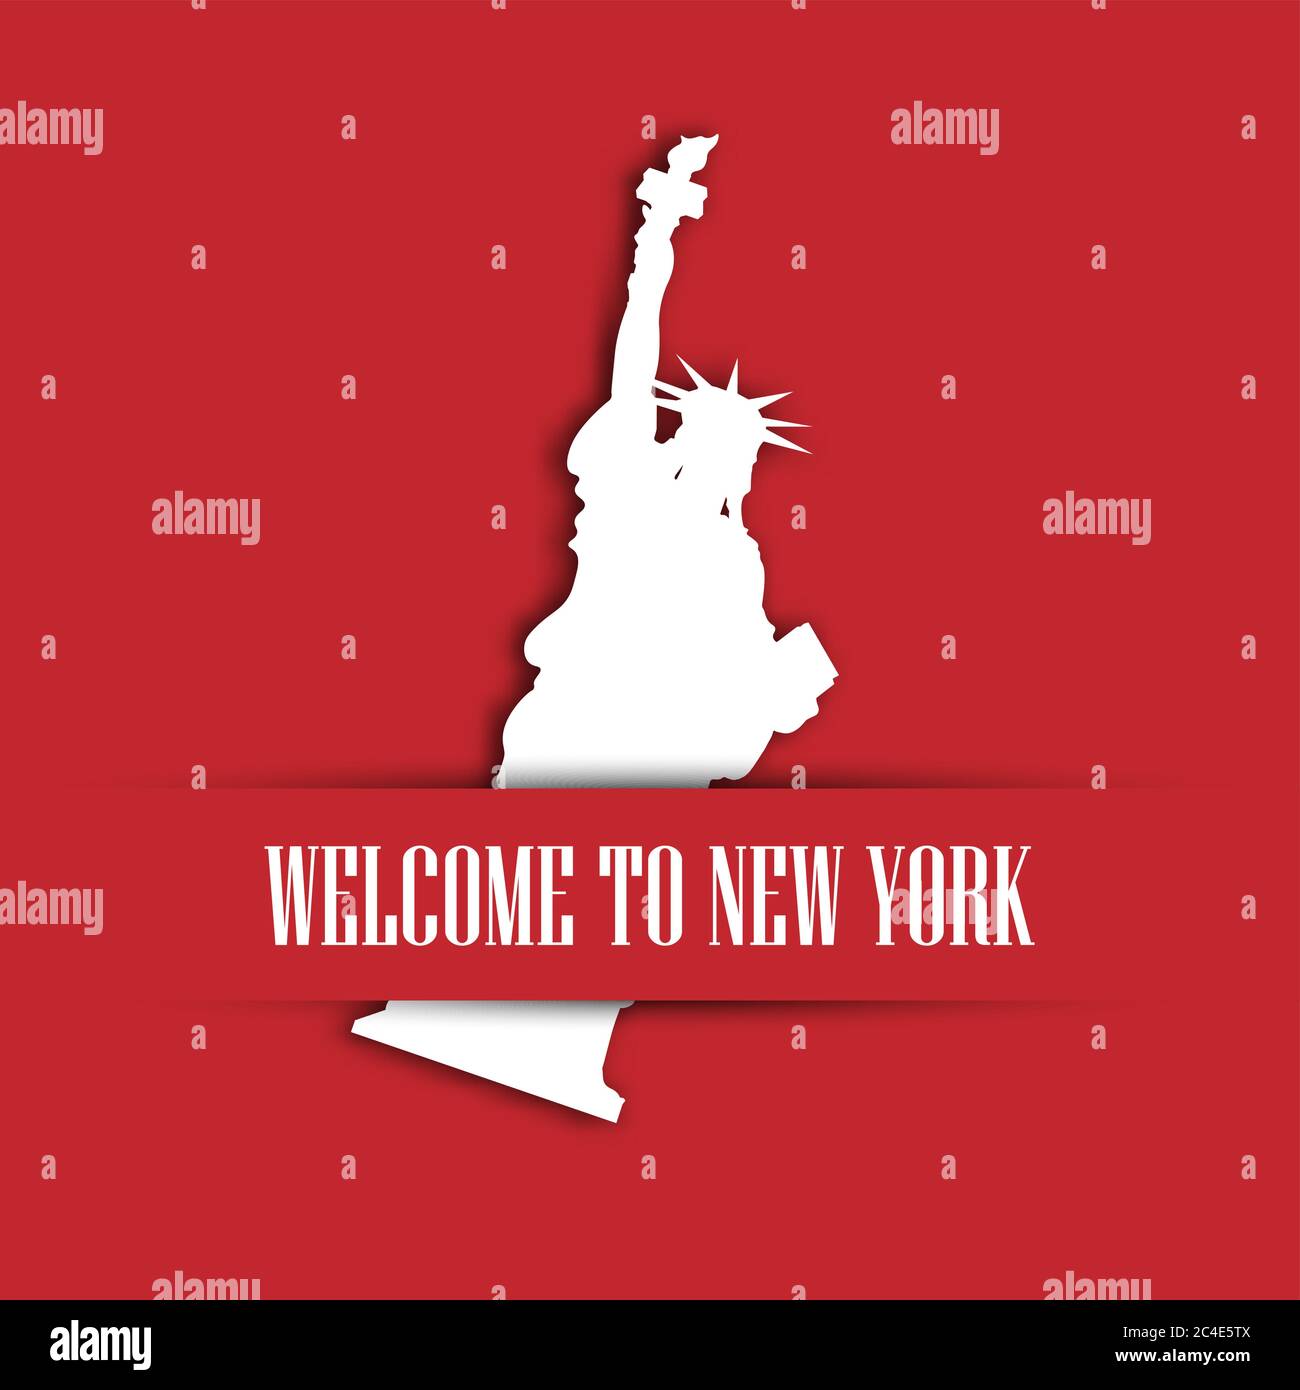 Statue of Liberty white paper cutting in red greeting card pocket with label Welcome to New York. United States symbol and Independence day theme. Vector illustration. Stock Vector